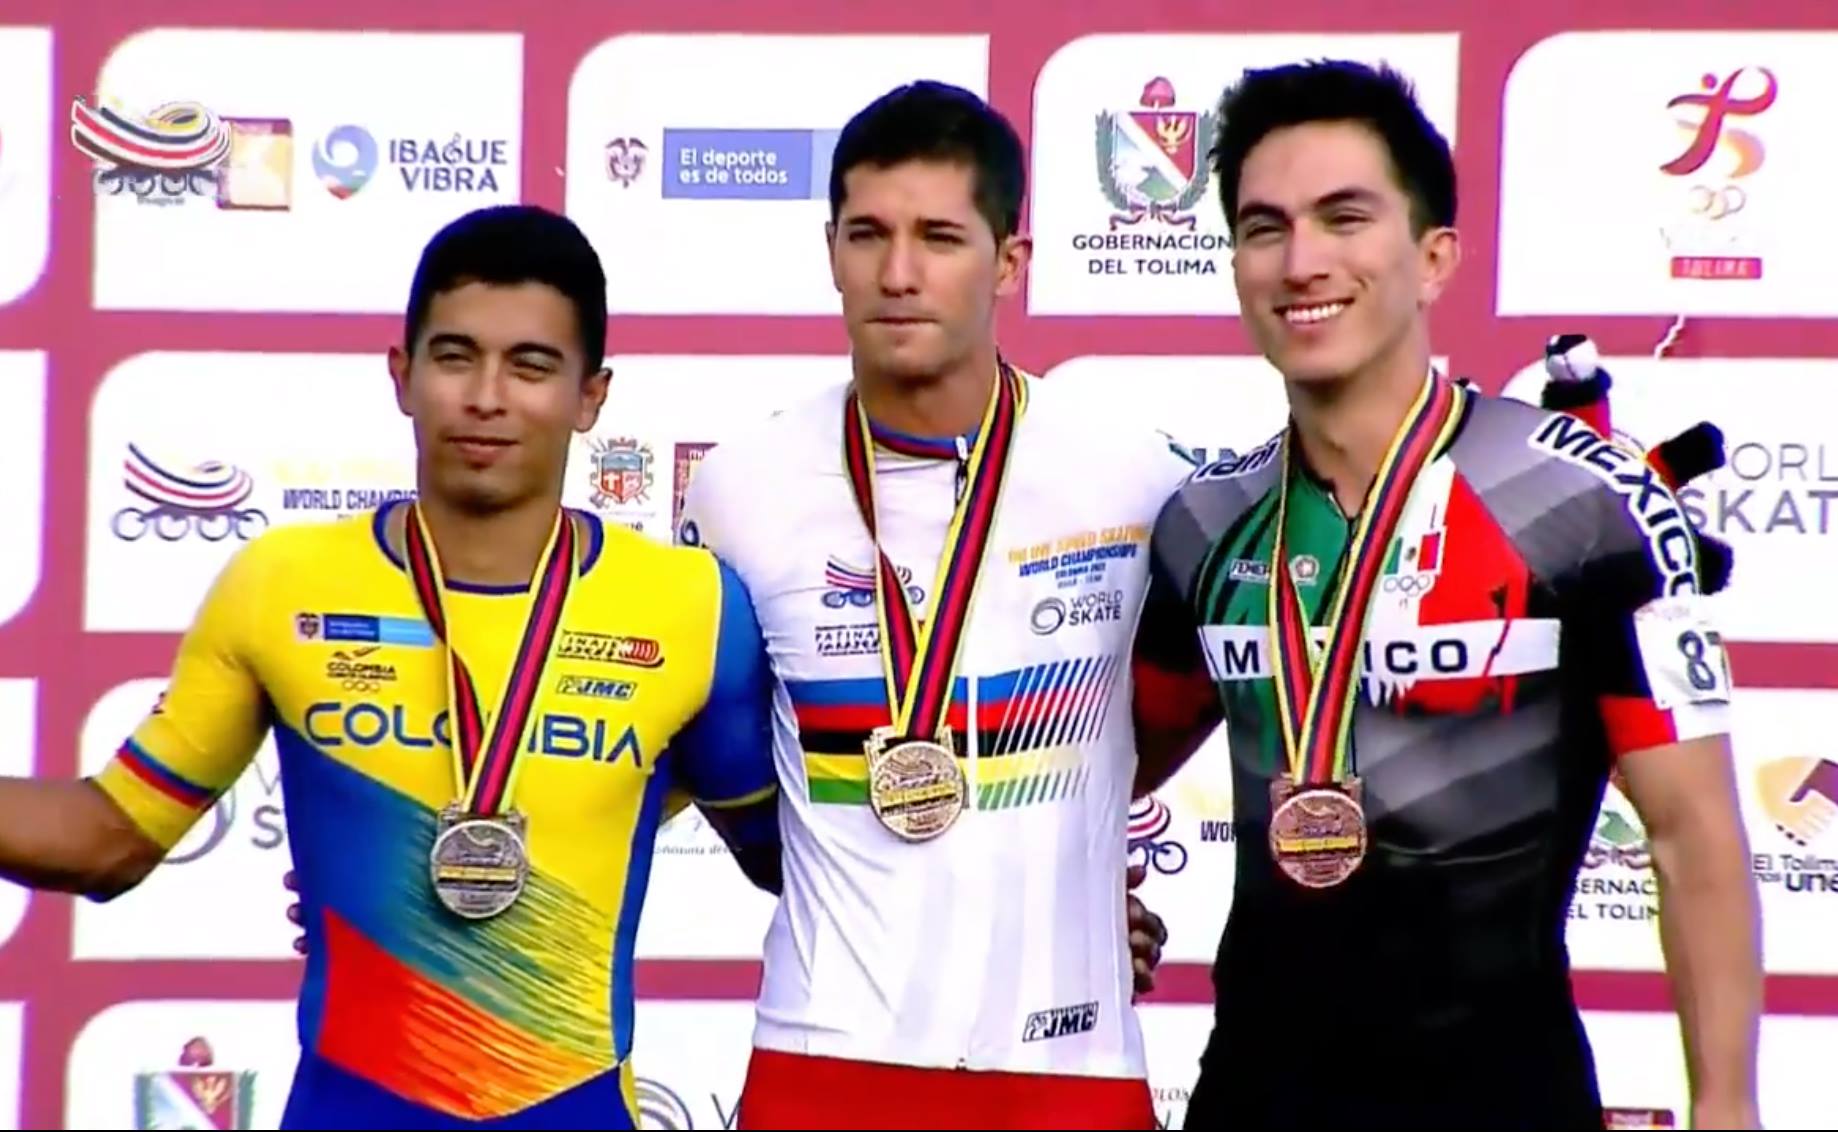 Among the fastest on the planet; Jorge Martinez wins bronze in the 100 meters world championship.